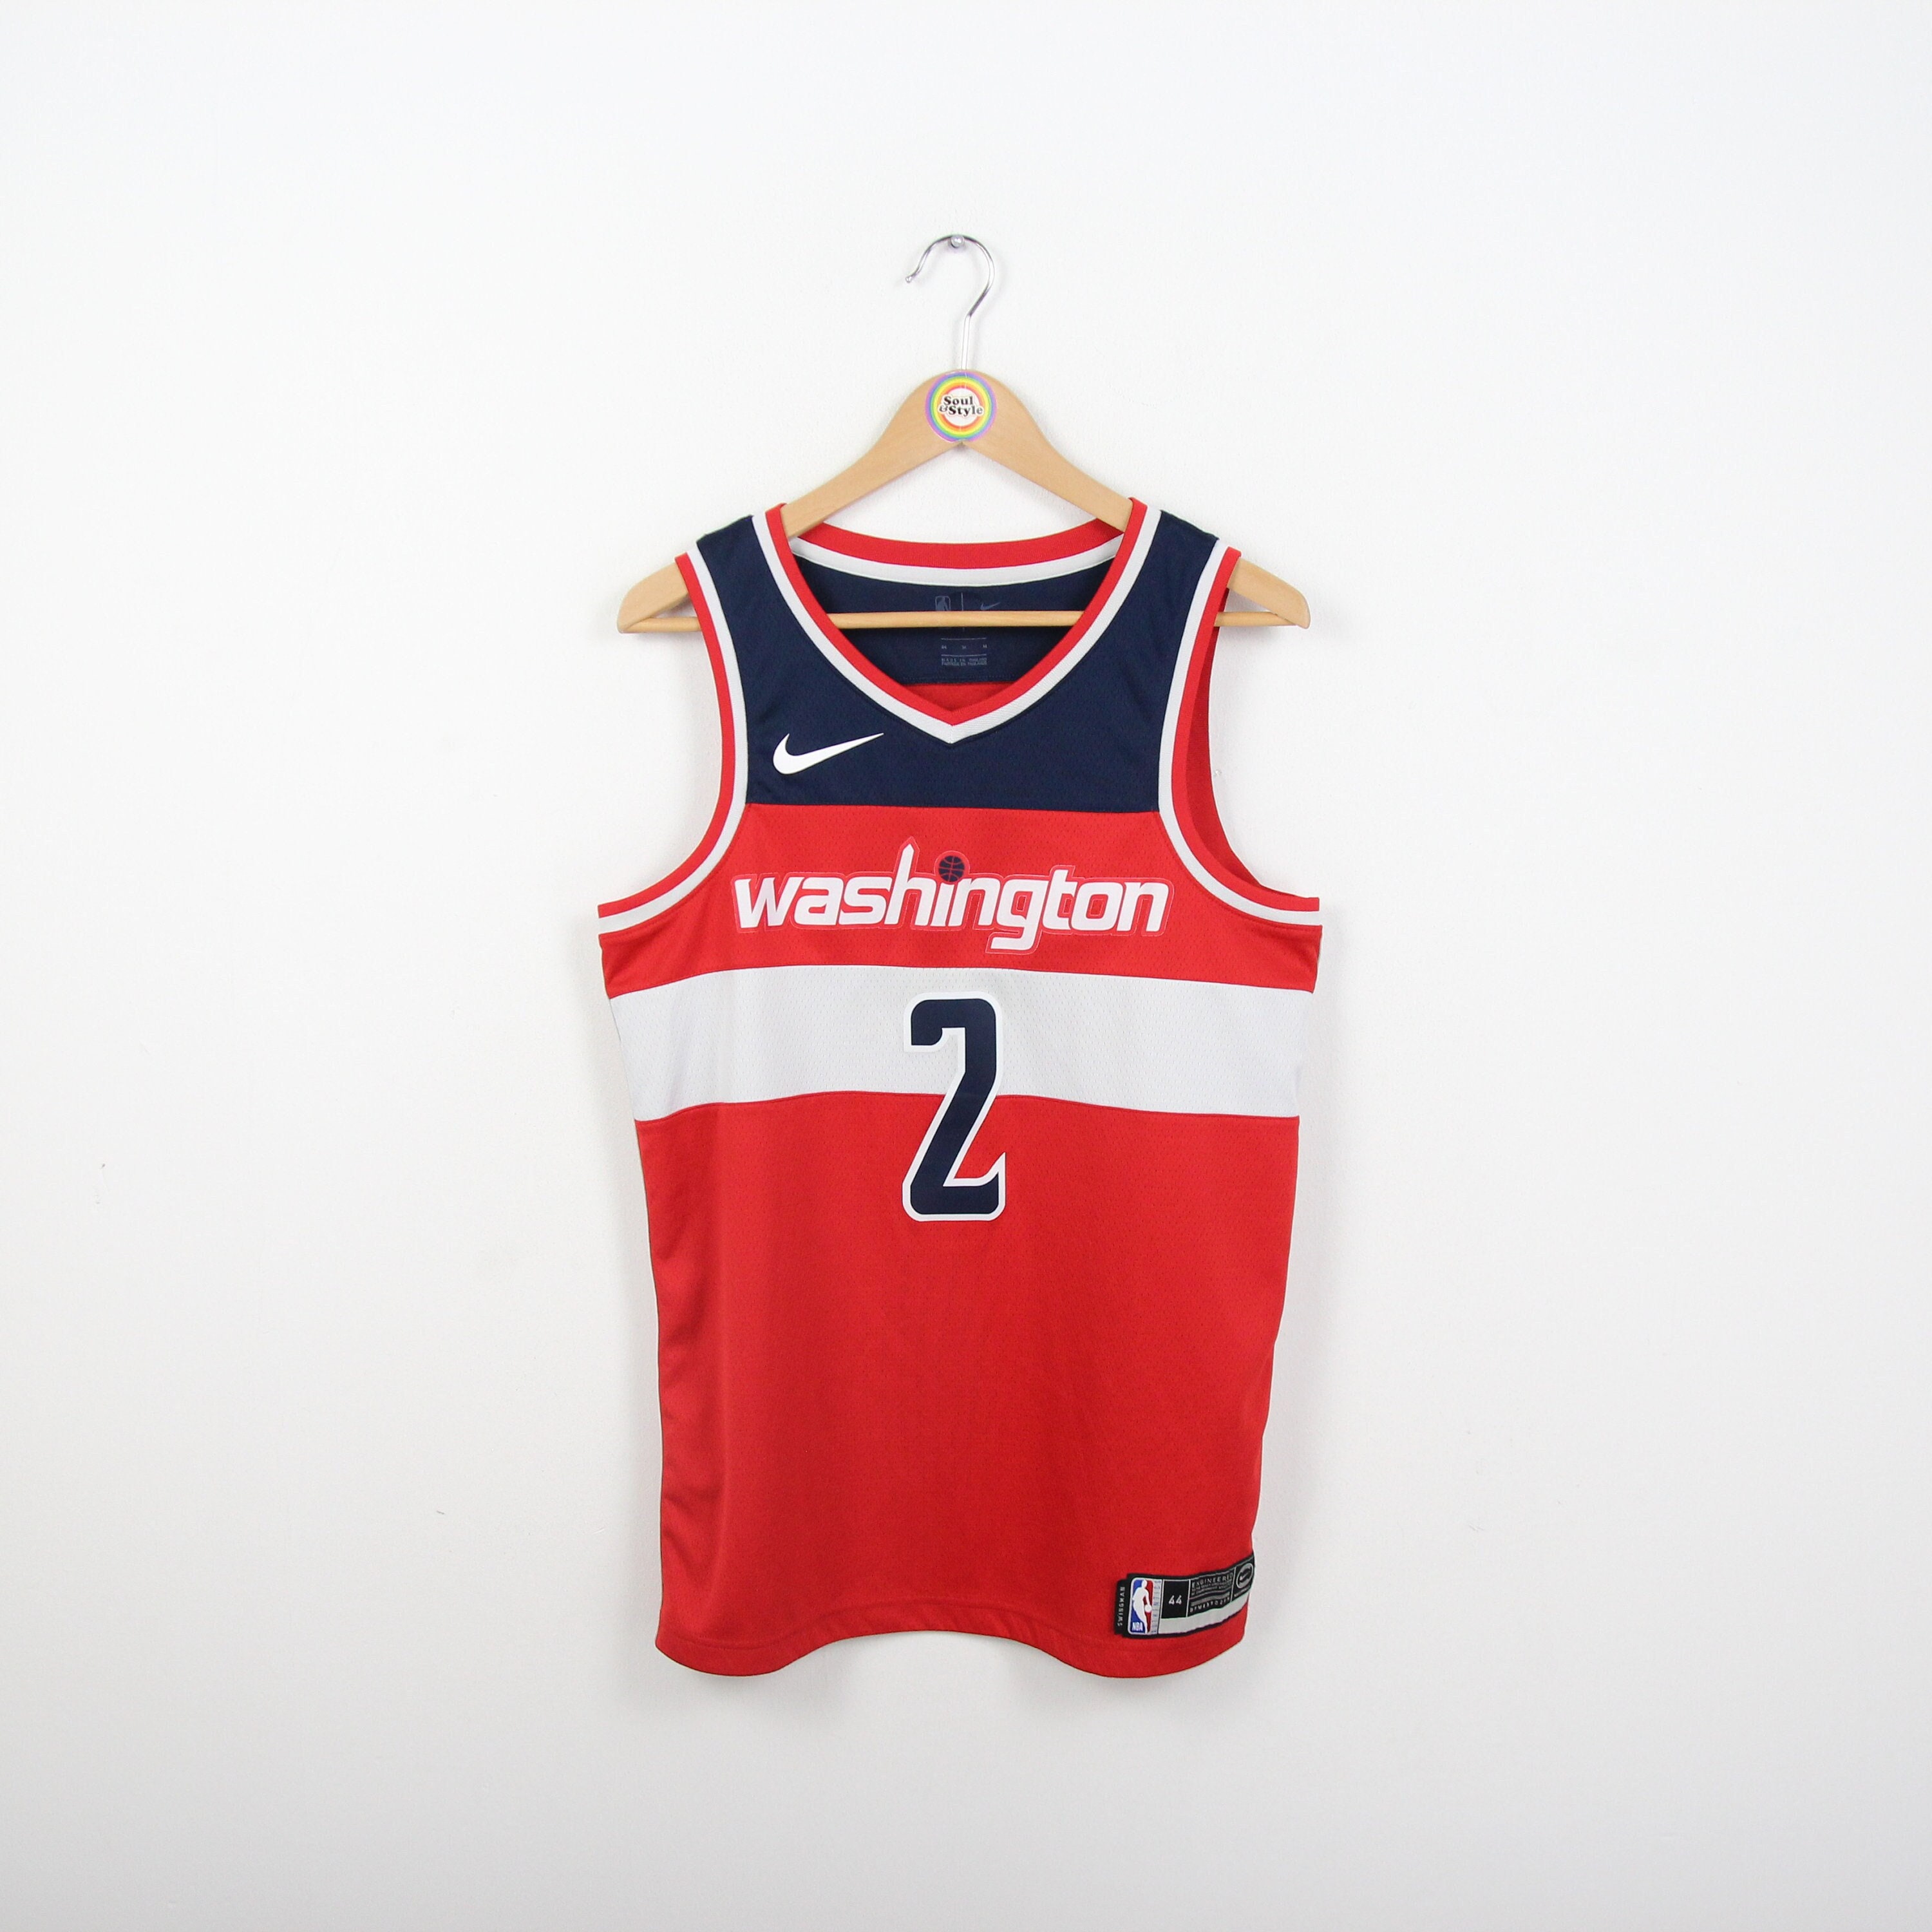 Soul Swingman, throwback and more vintage NBA jerseys available on